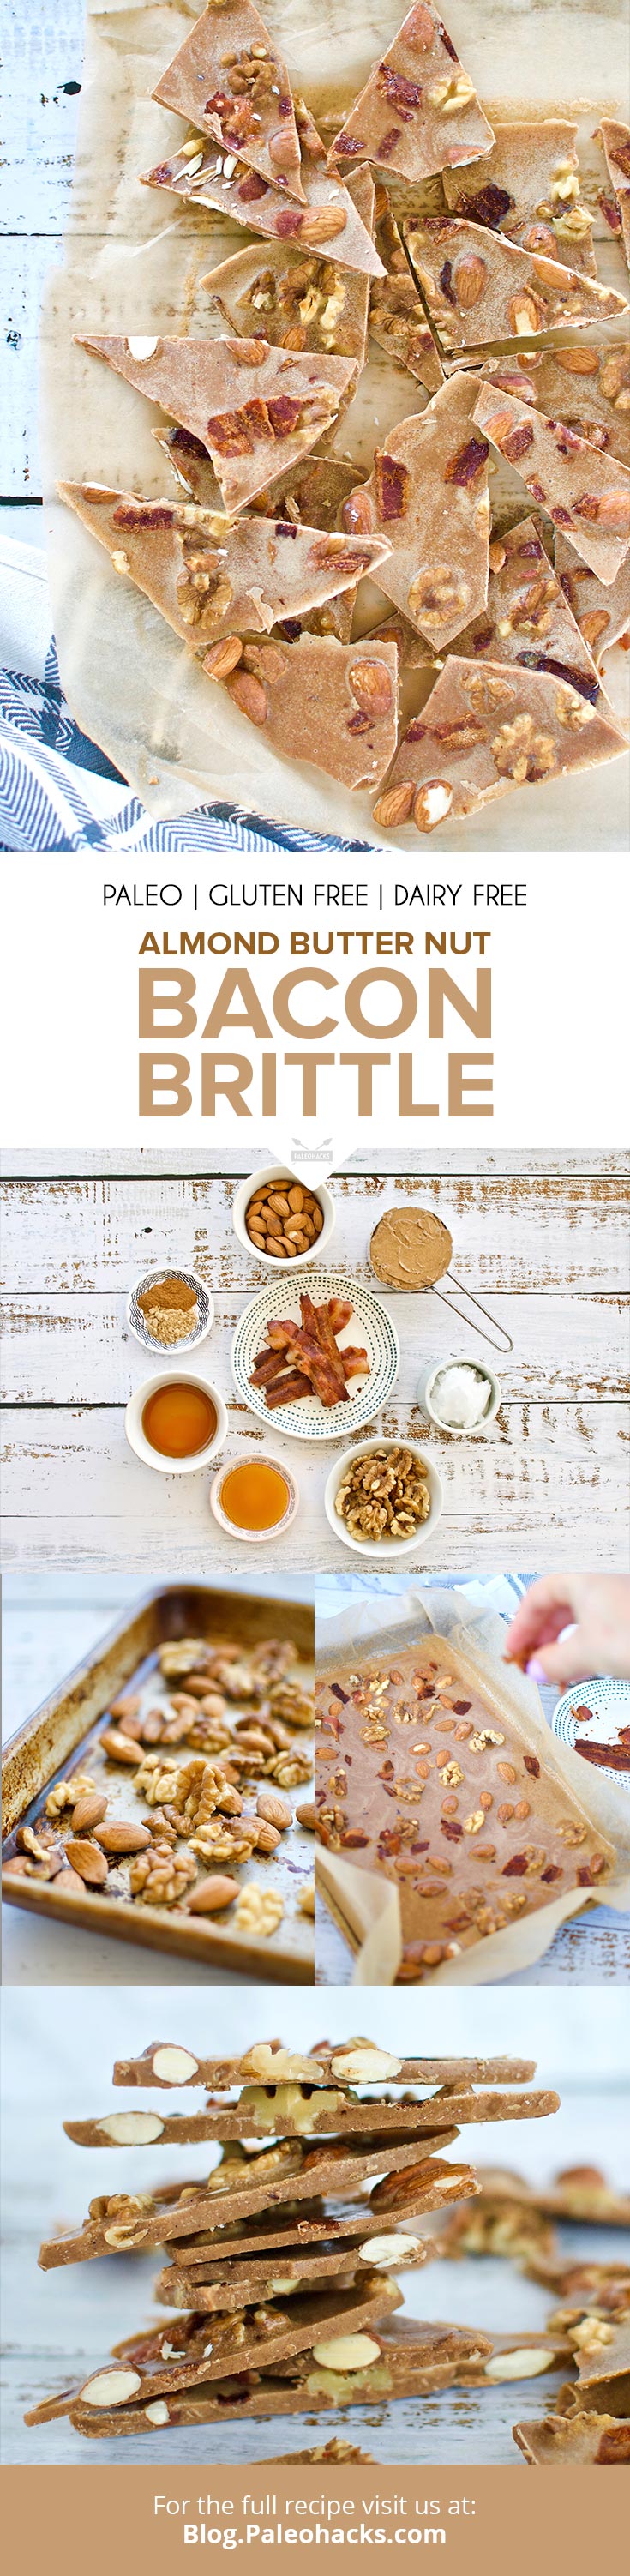 Curb multiple cravings with this sweet and salty brittle packed with creamy almond butter and smokey bacon. Who says candy isn't allowed on the Paleo diet?